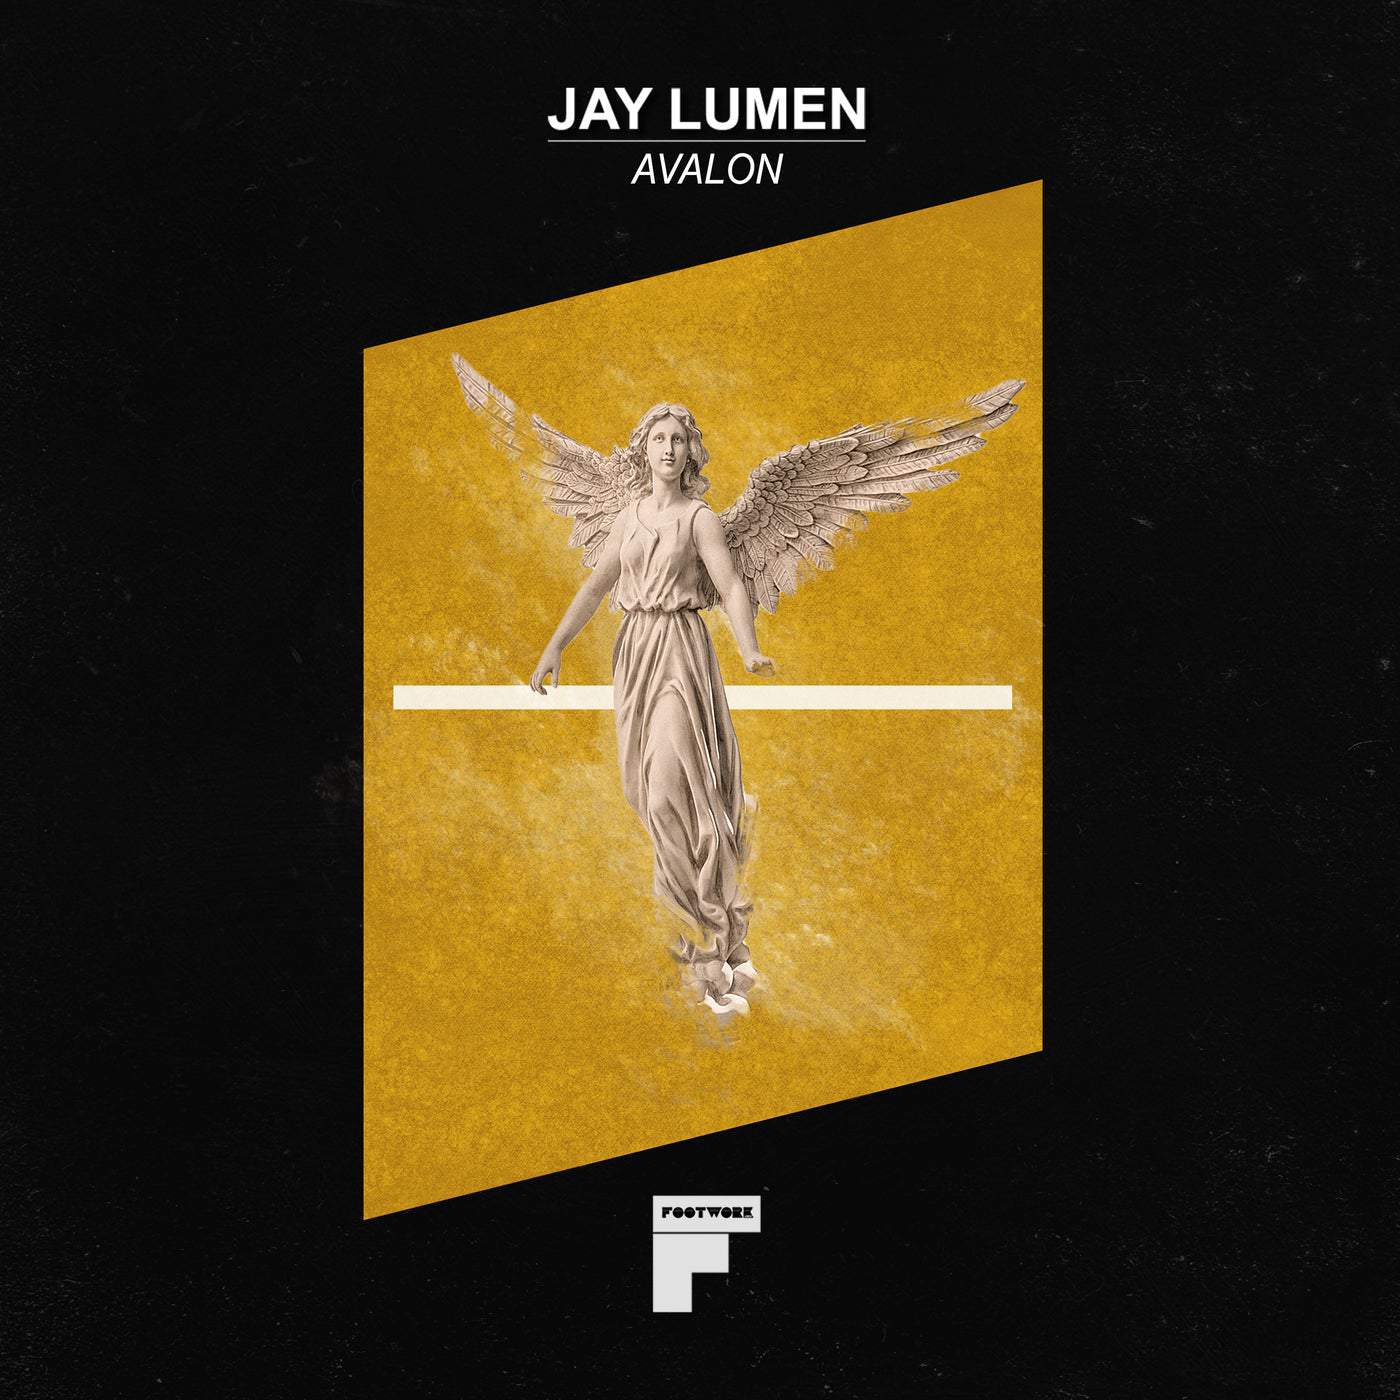 image cover: Jay Lumen - Avalon on Footwork